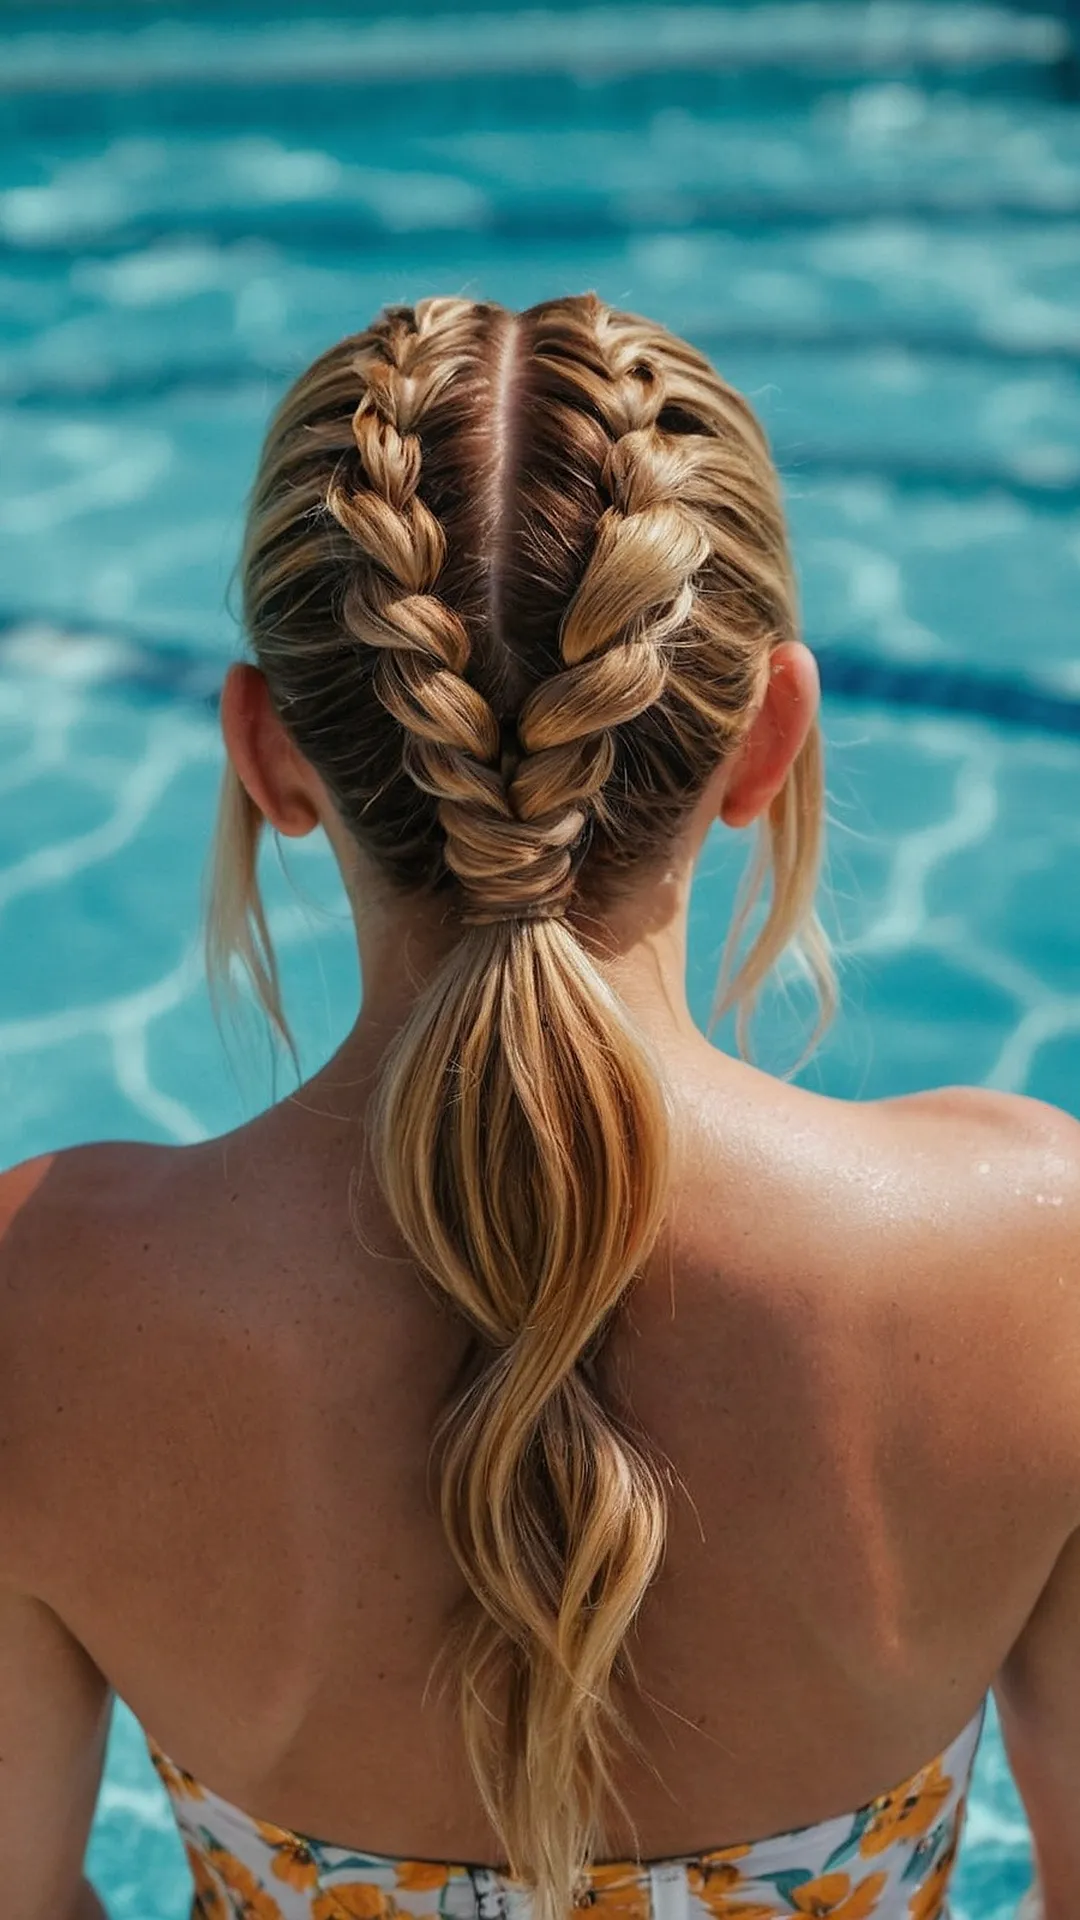 Pool Party Hair Goals